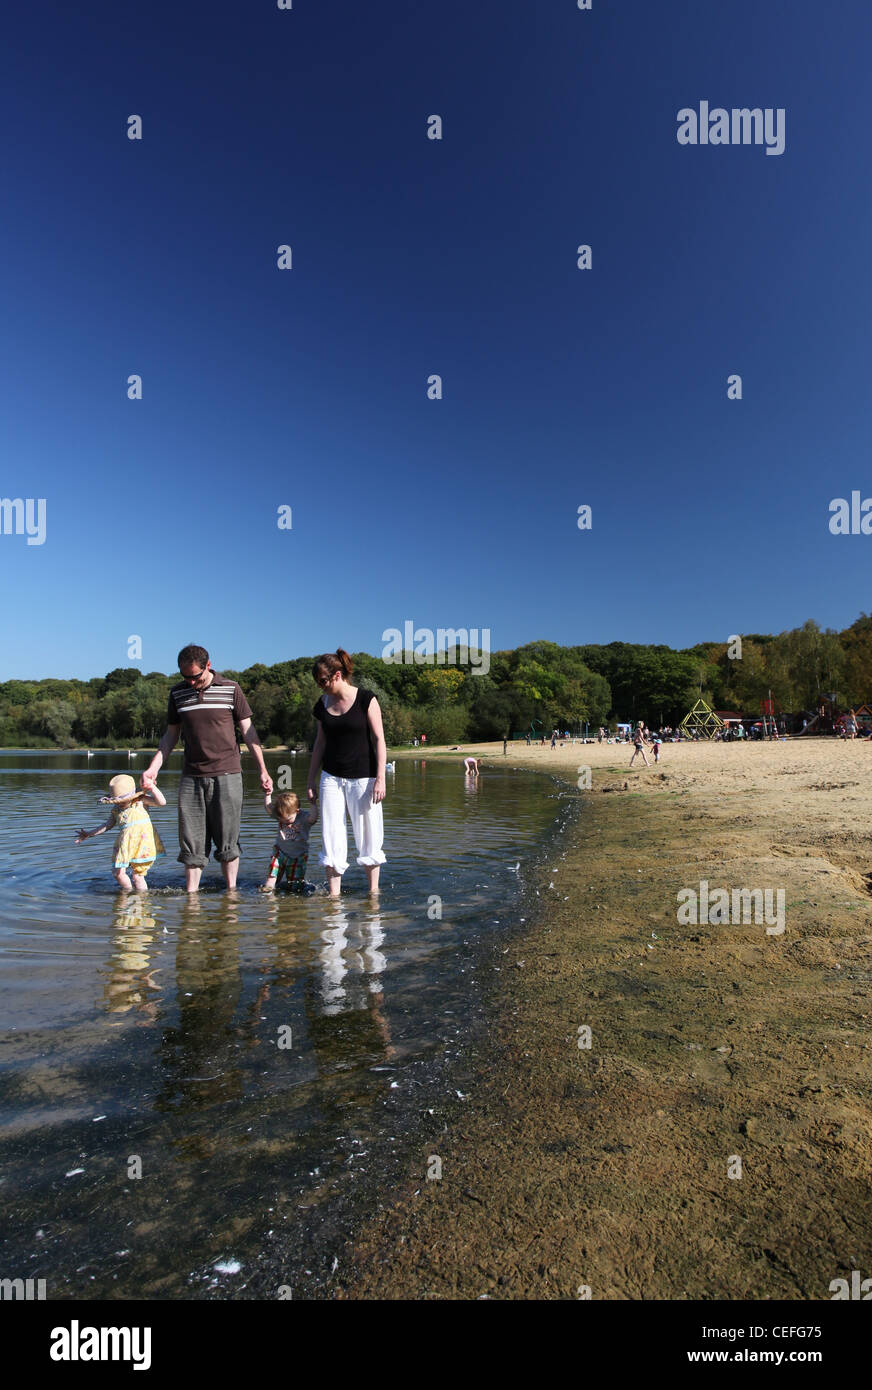 A view of Ruislip Lido, Middlesex on a summer day Stock Photo